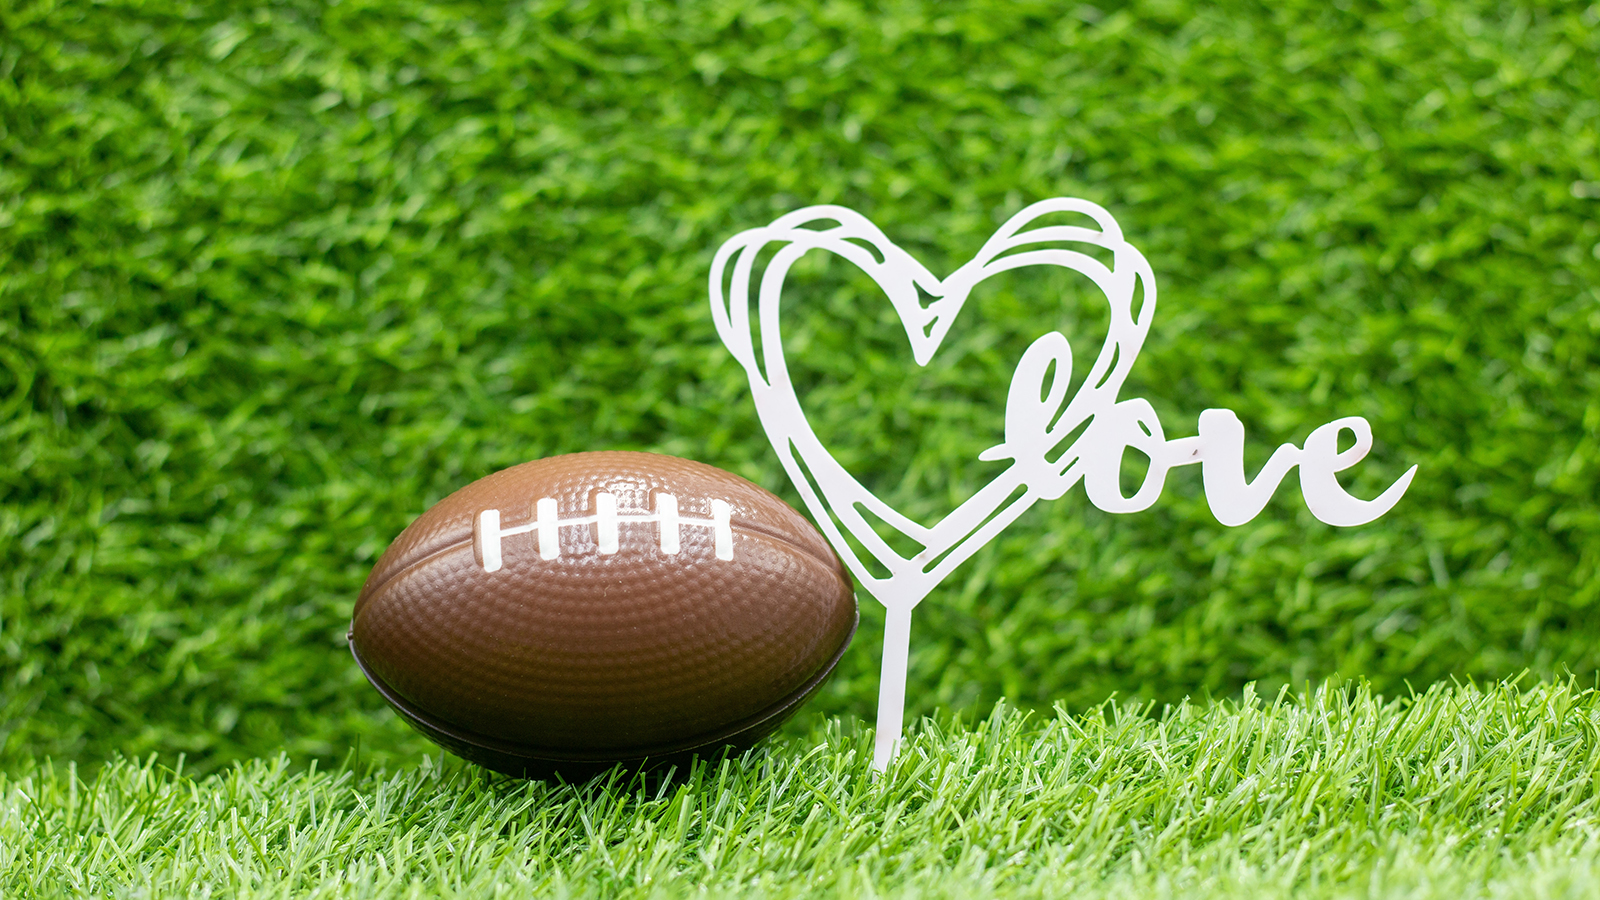 American Football with love on green grass